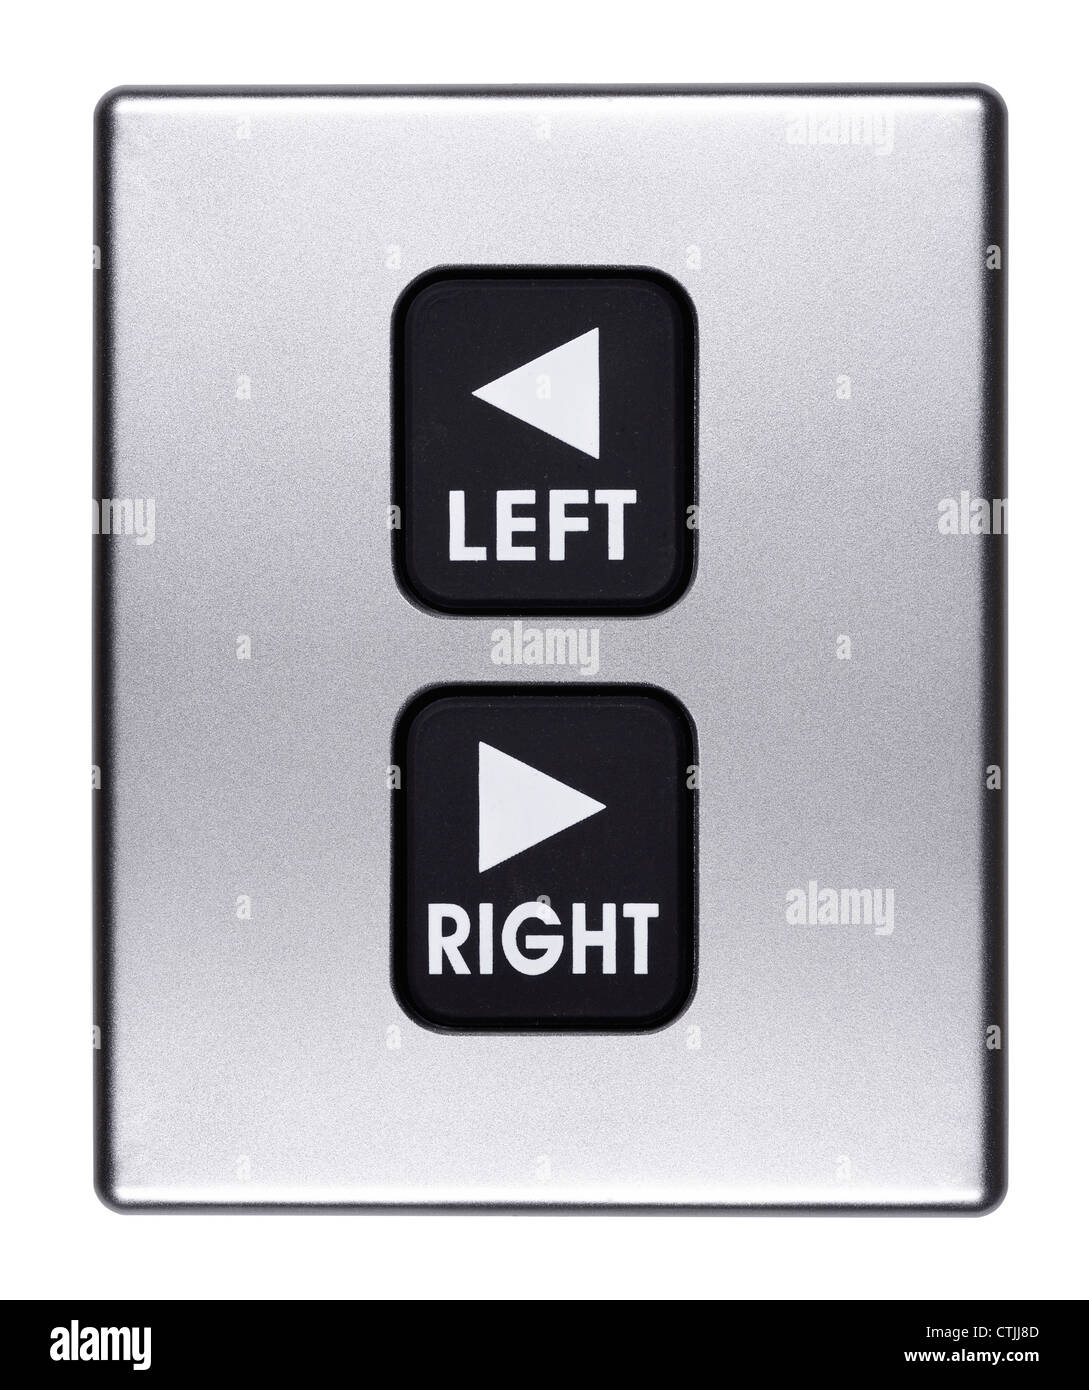 Left and Right buttons Stock Photo